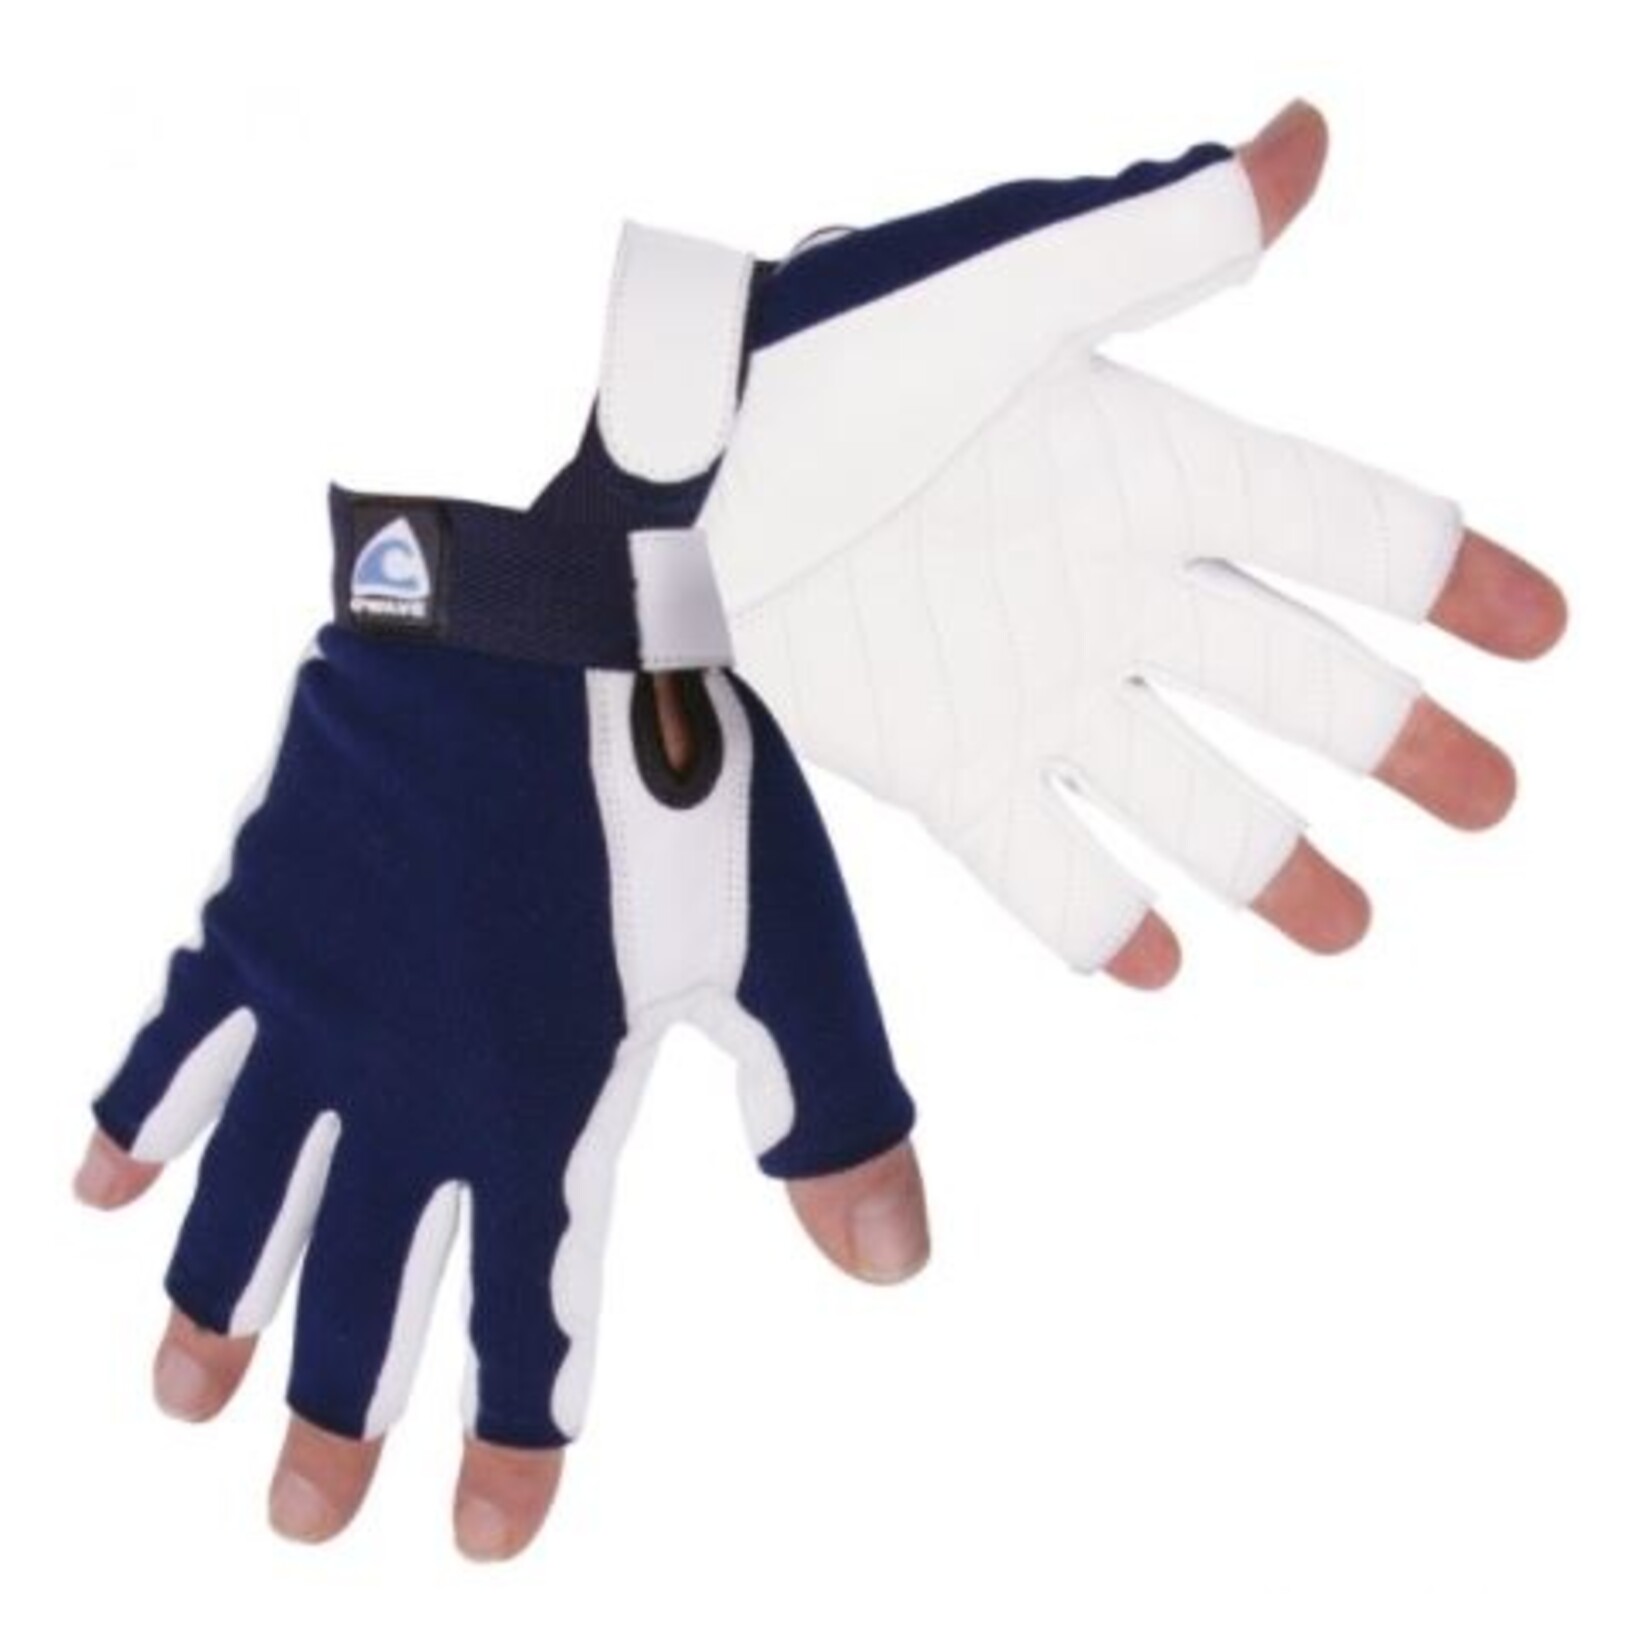 Plastimo O'wave gloves first+ 2dc s